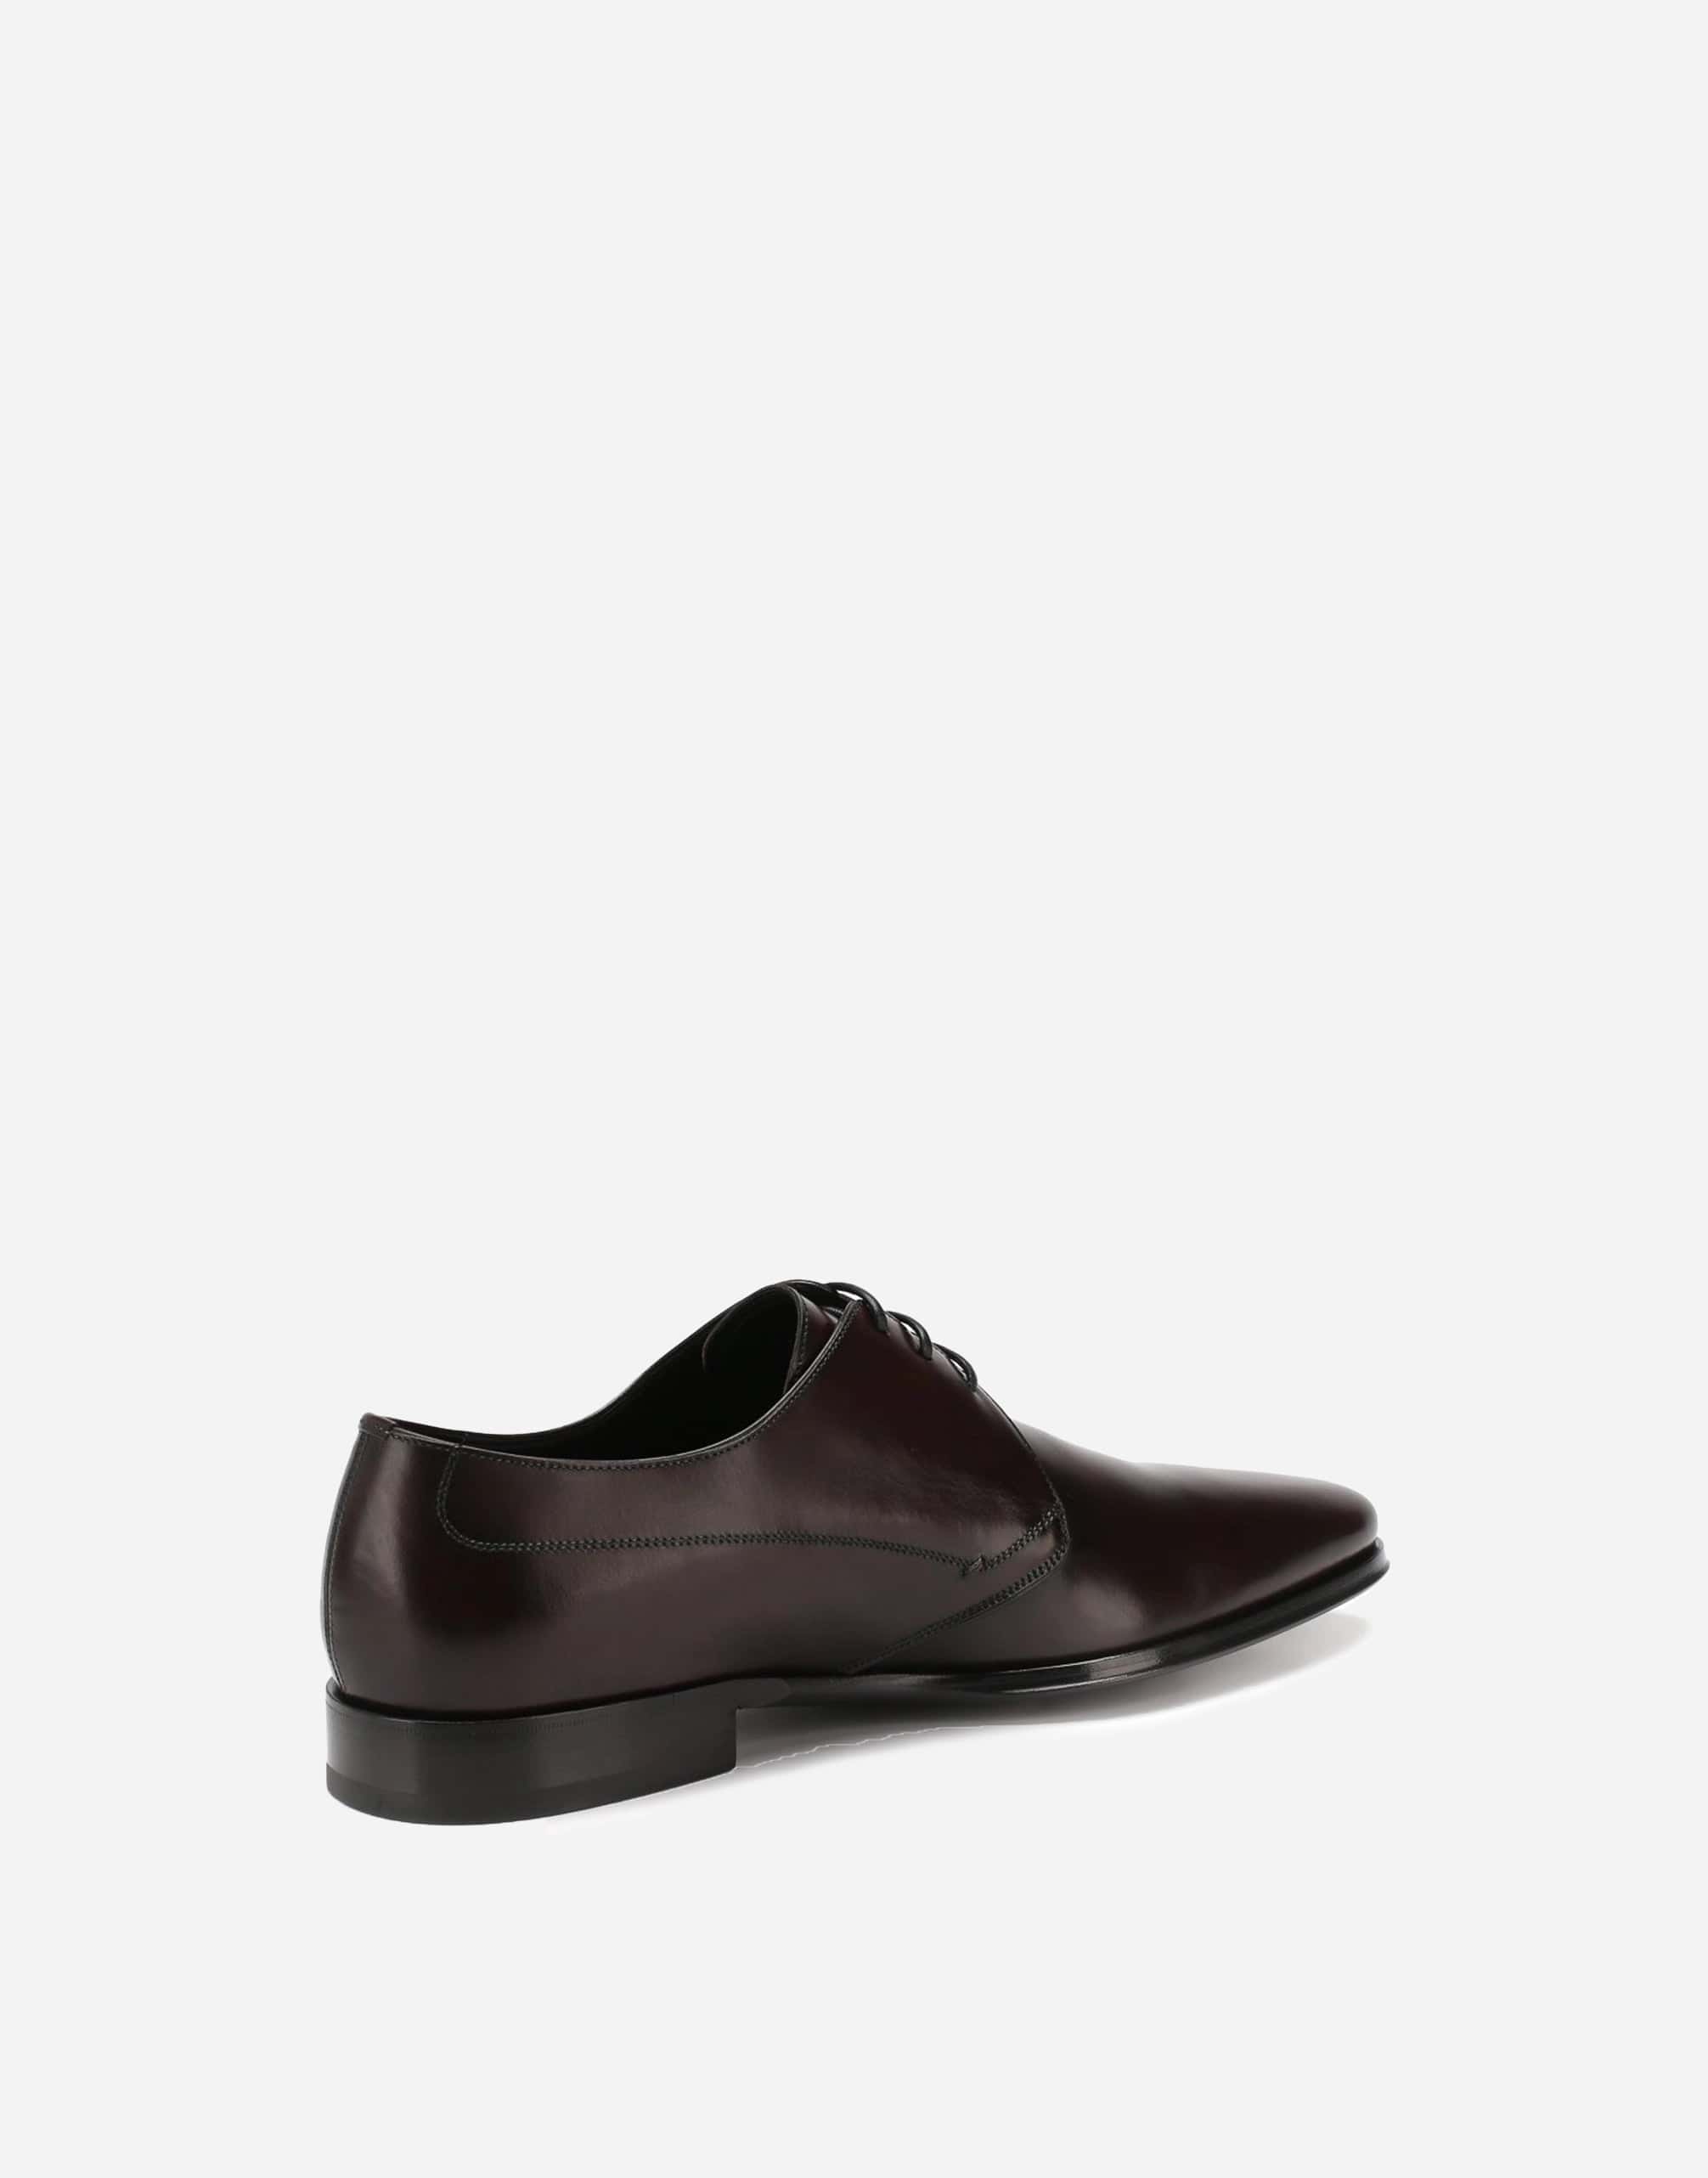 Dolce & Gabbana Smooth Leather Derby Shoes